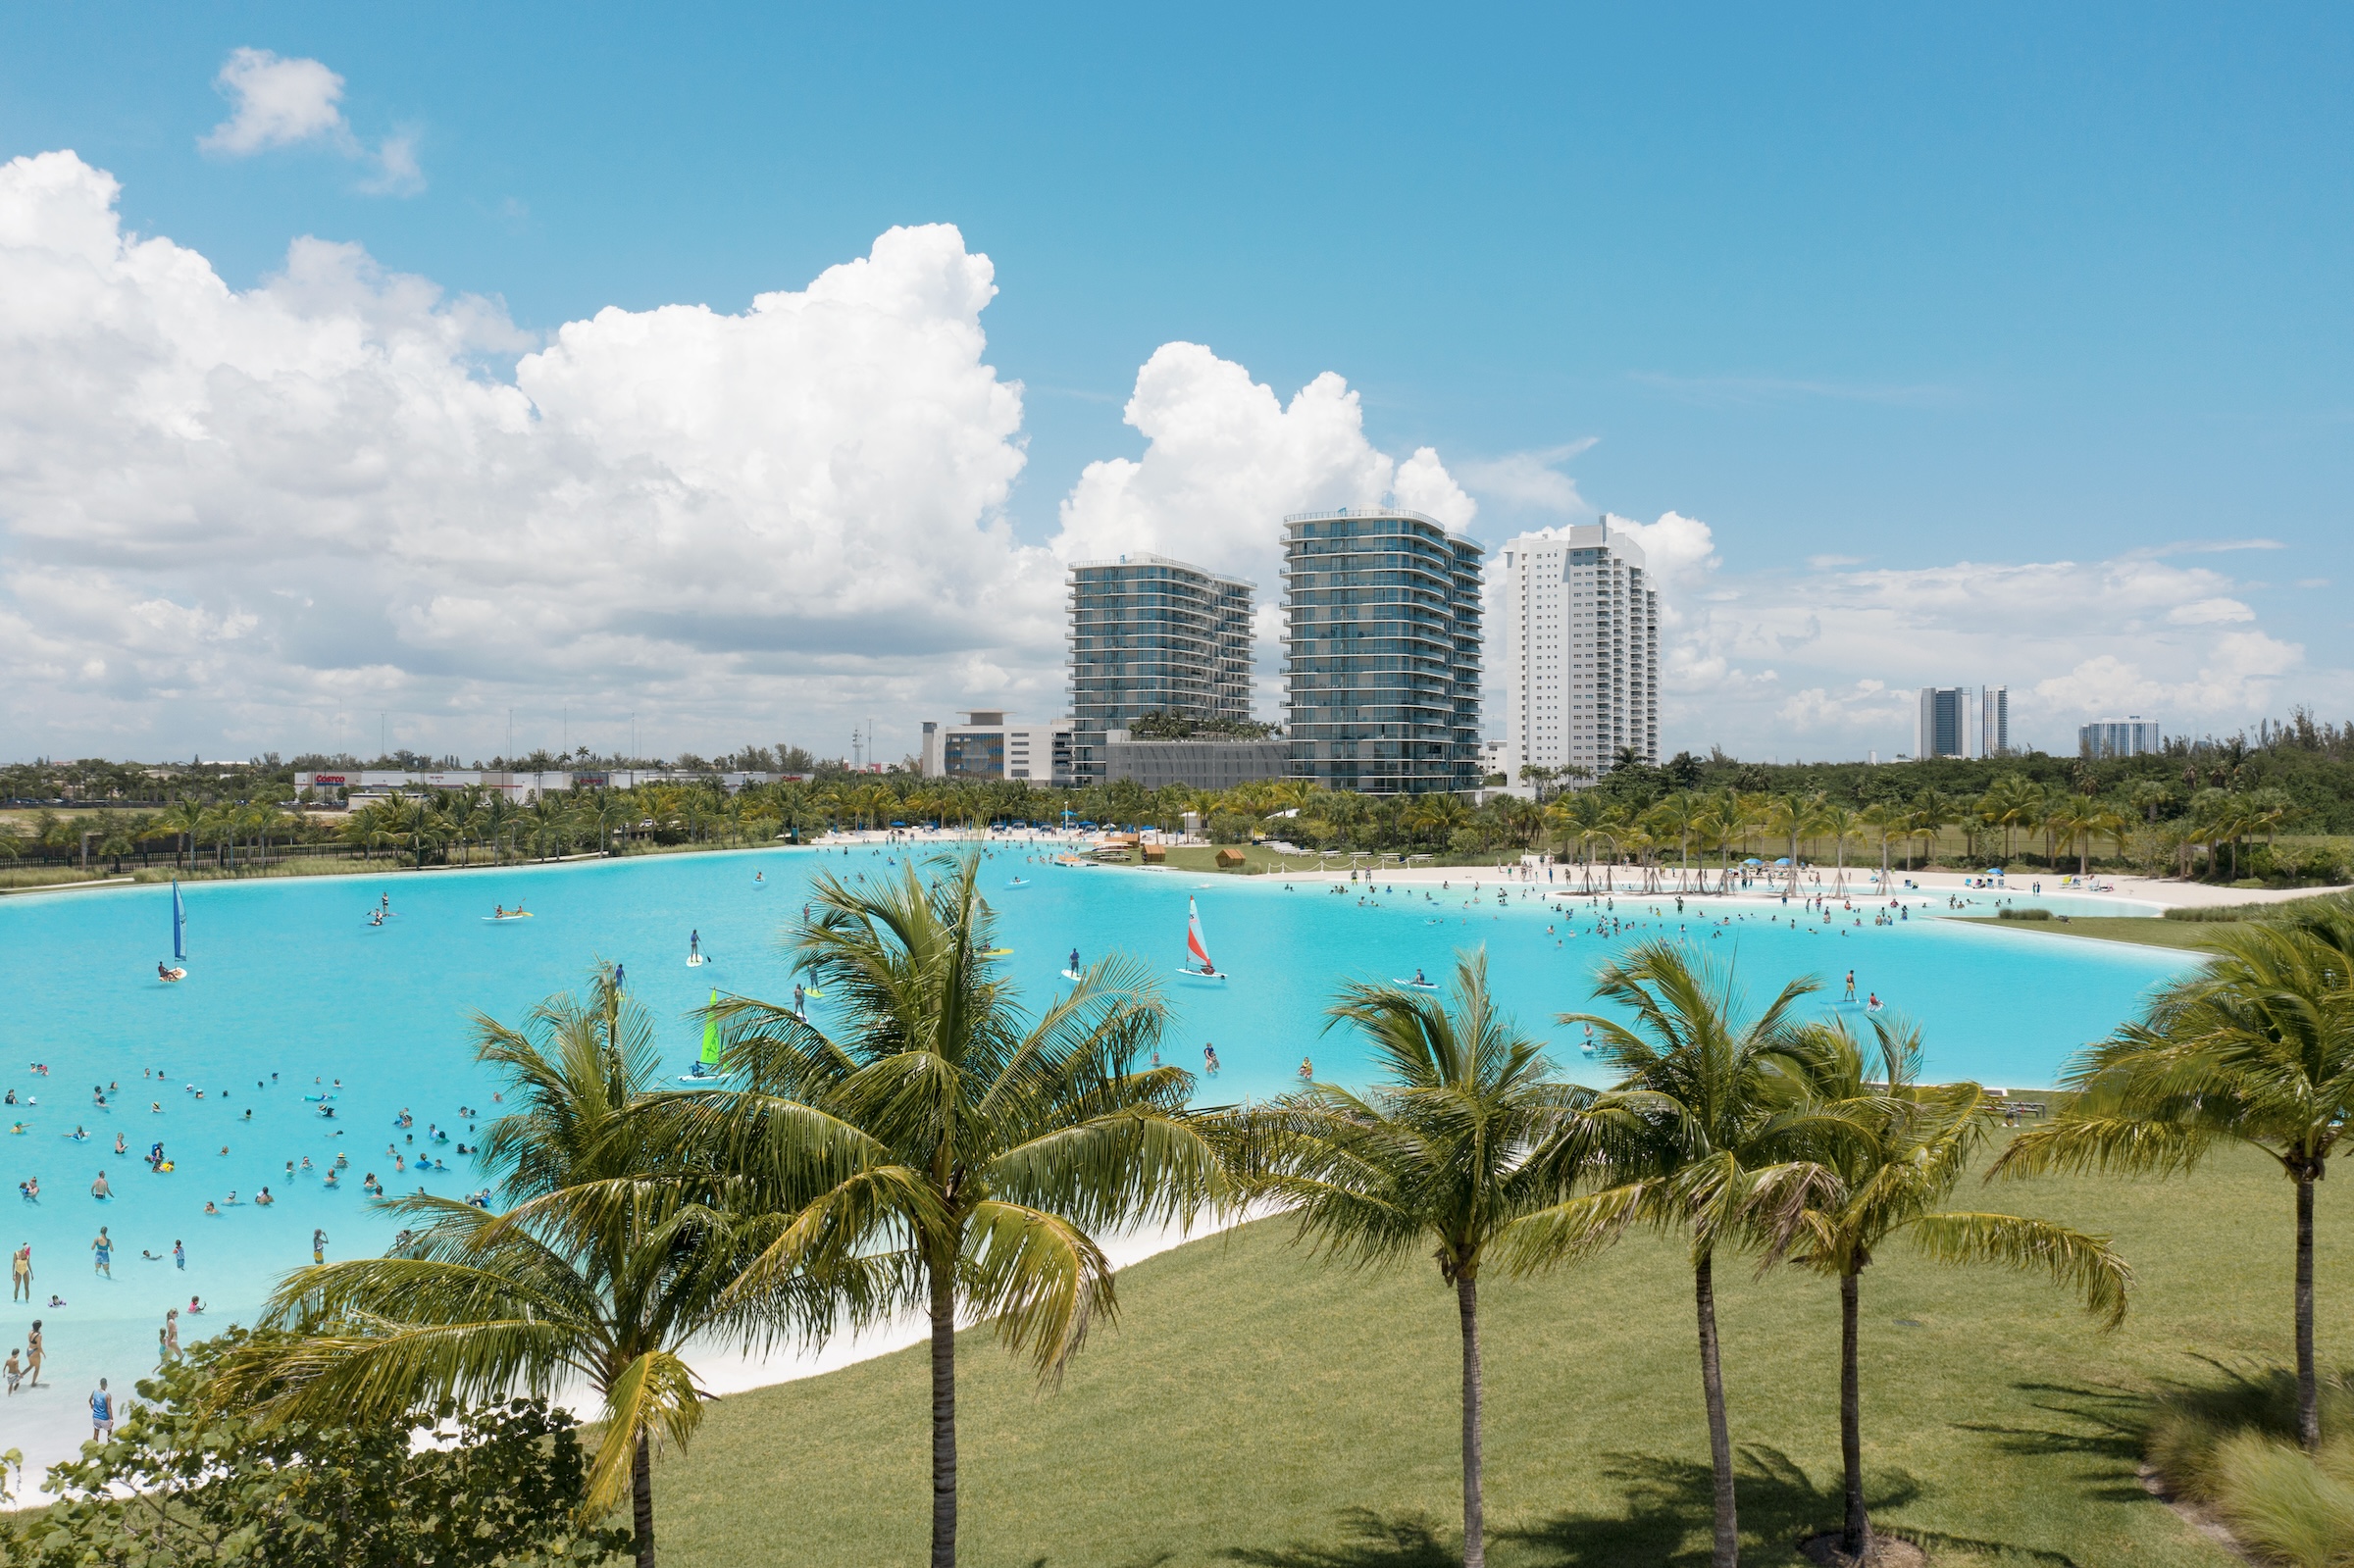 SoLé Mia, North Miami, Fla., is a luxury multifamily community with a seven-acre Crystal Lagoons pool. Photo courtesy Crystal Lagoons